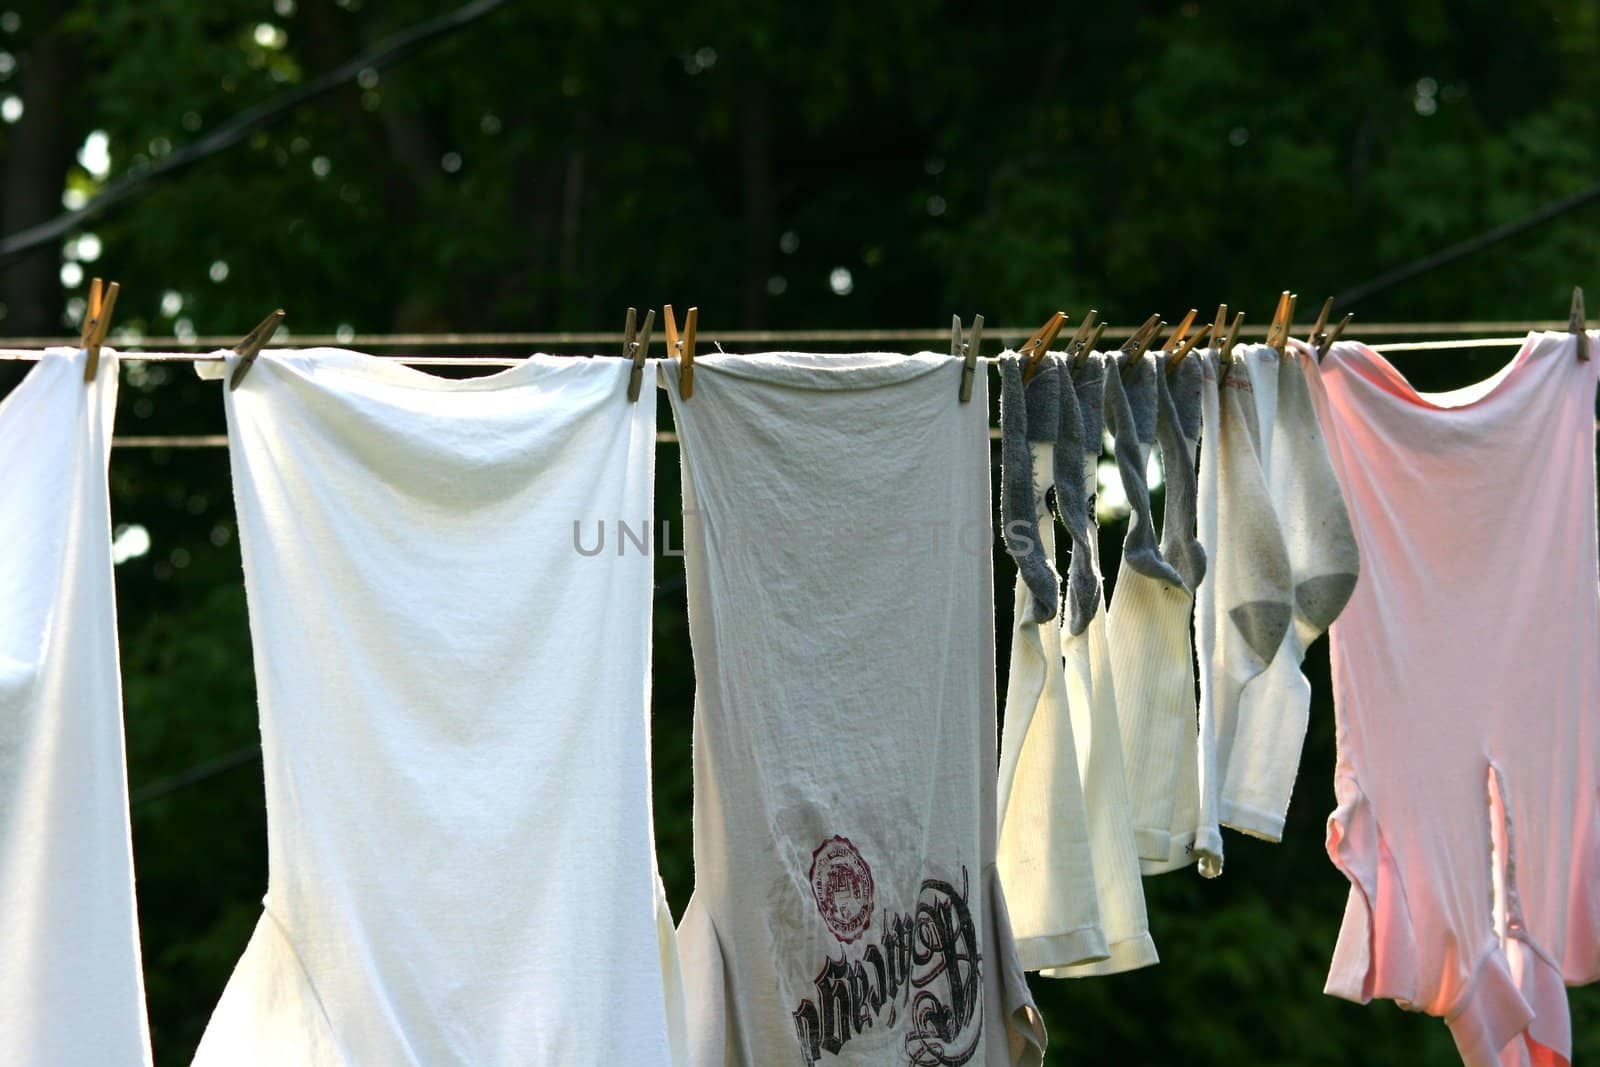 Clothes hanging outside to dry in the sun